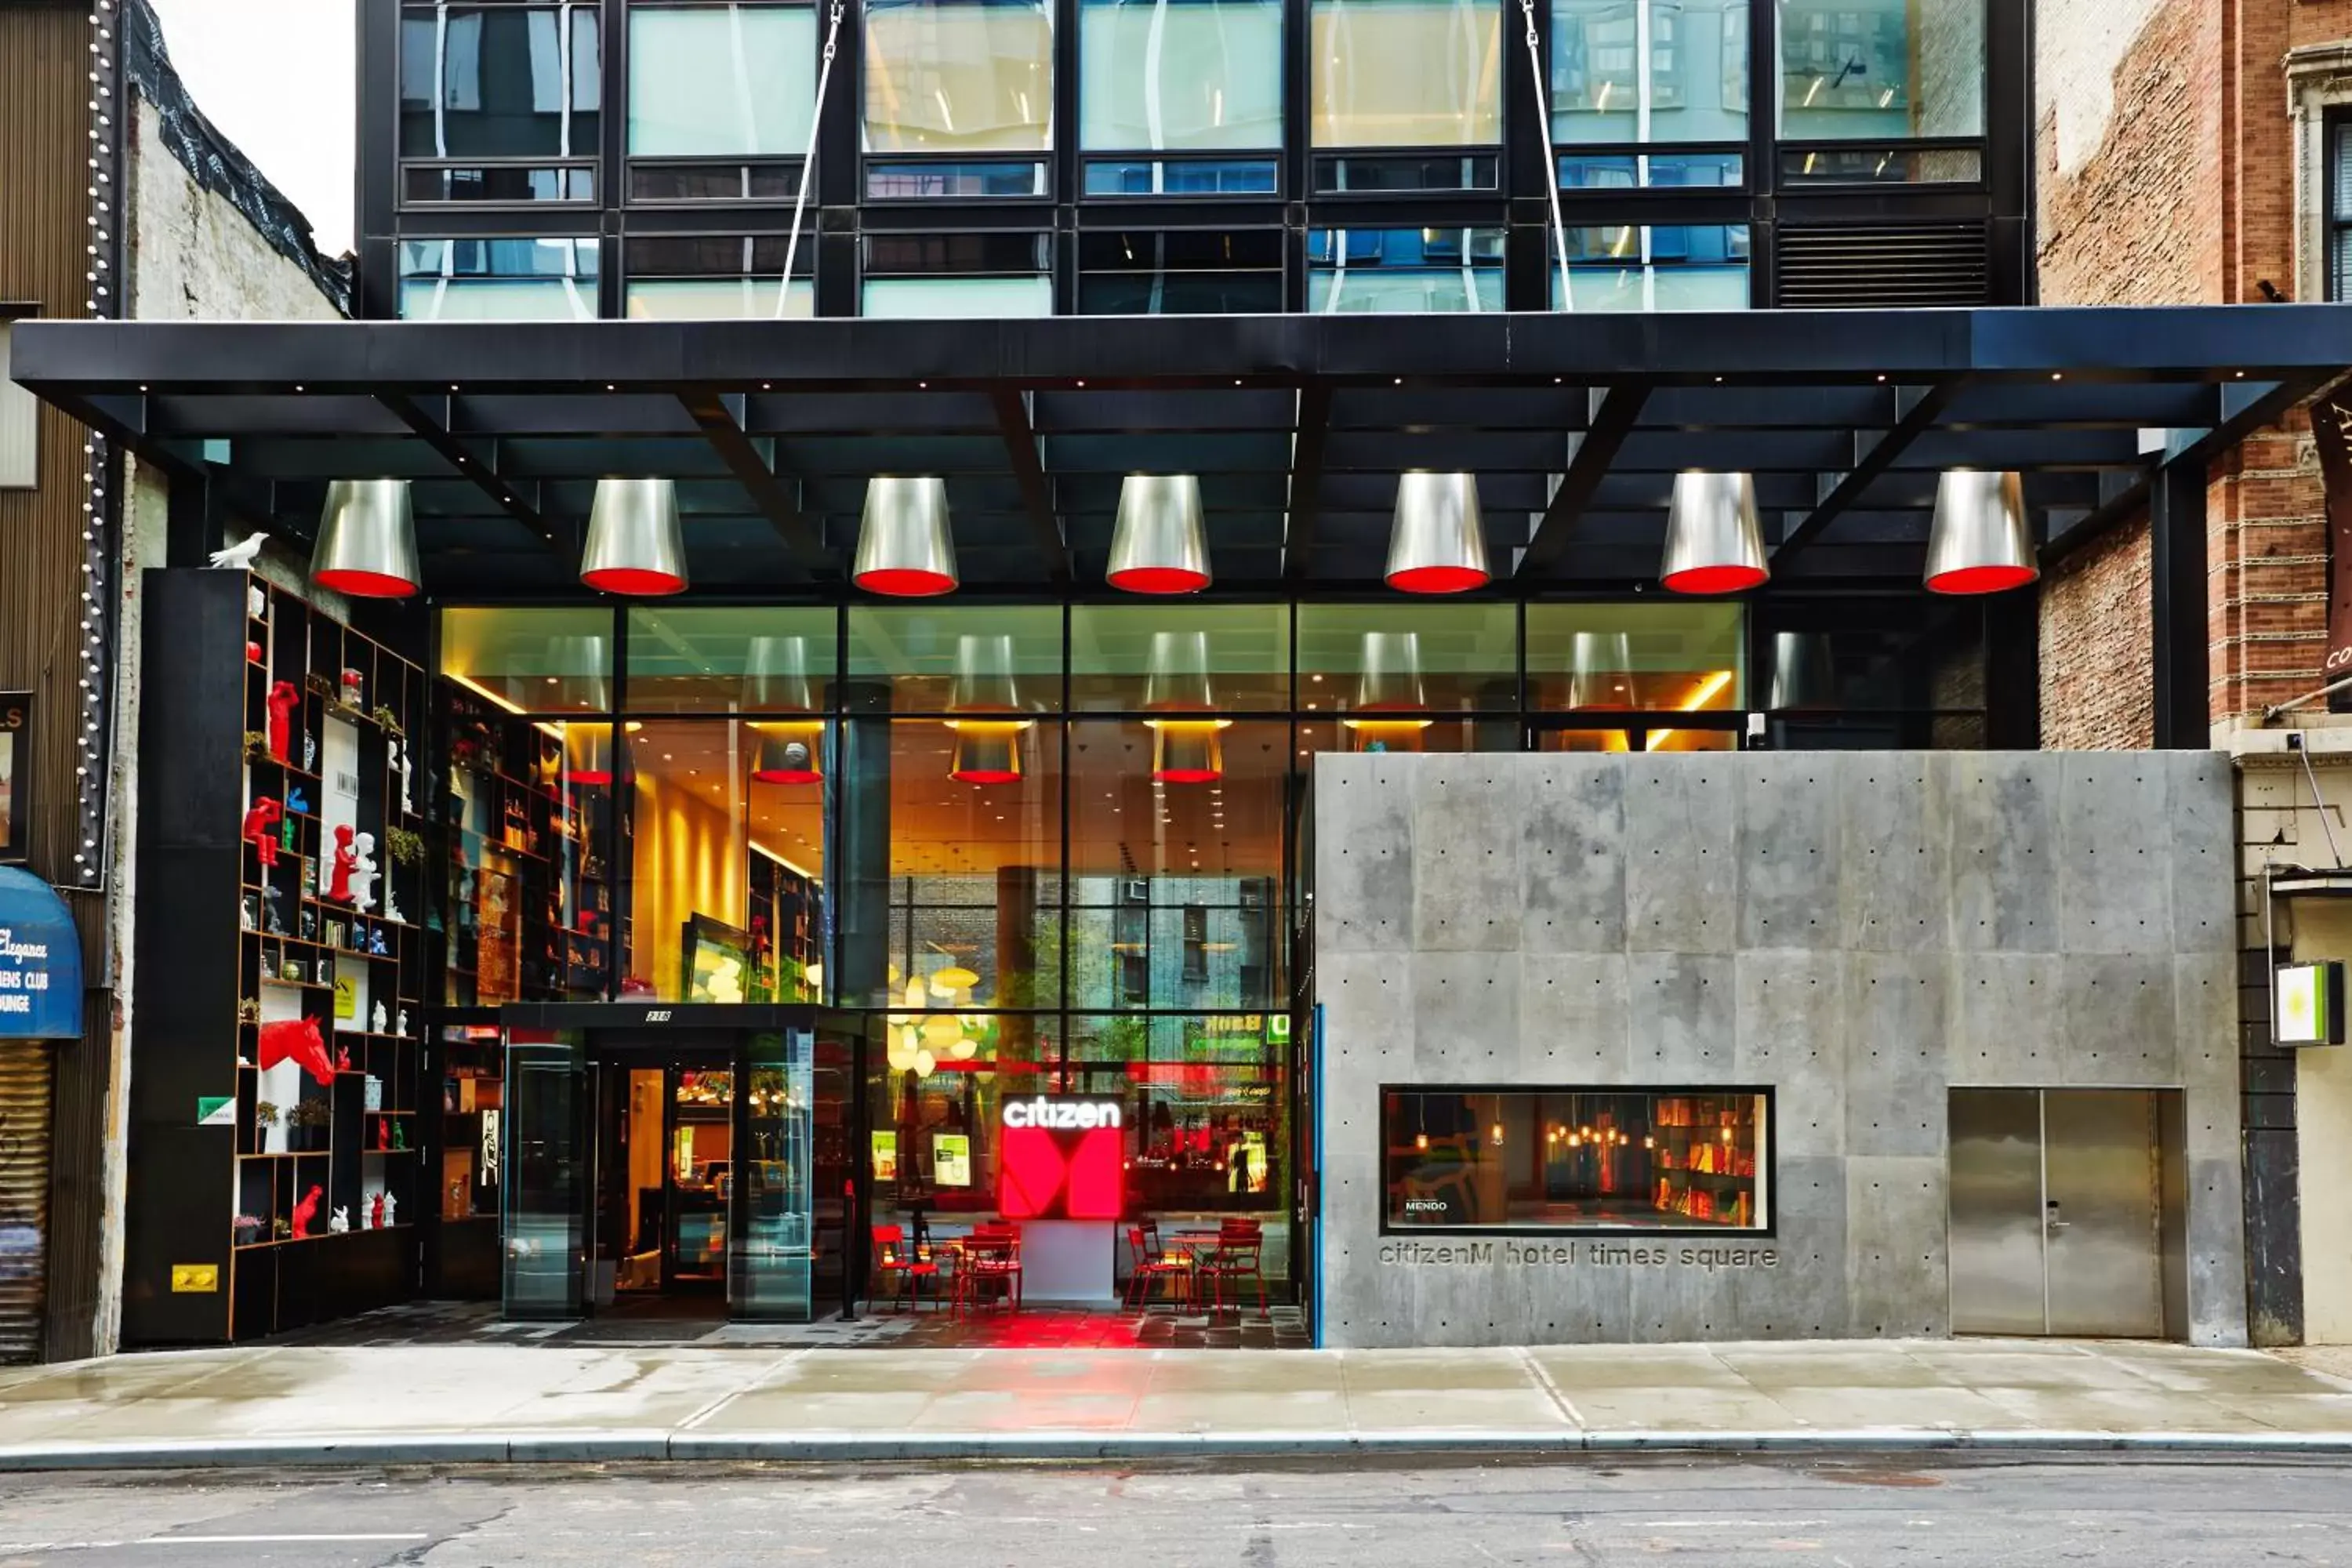 Property building in citizenM New York Times Square